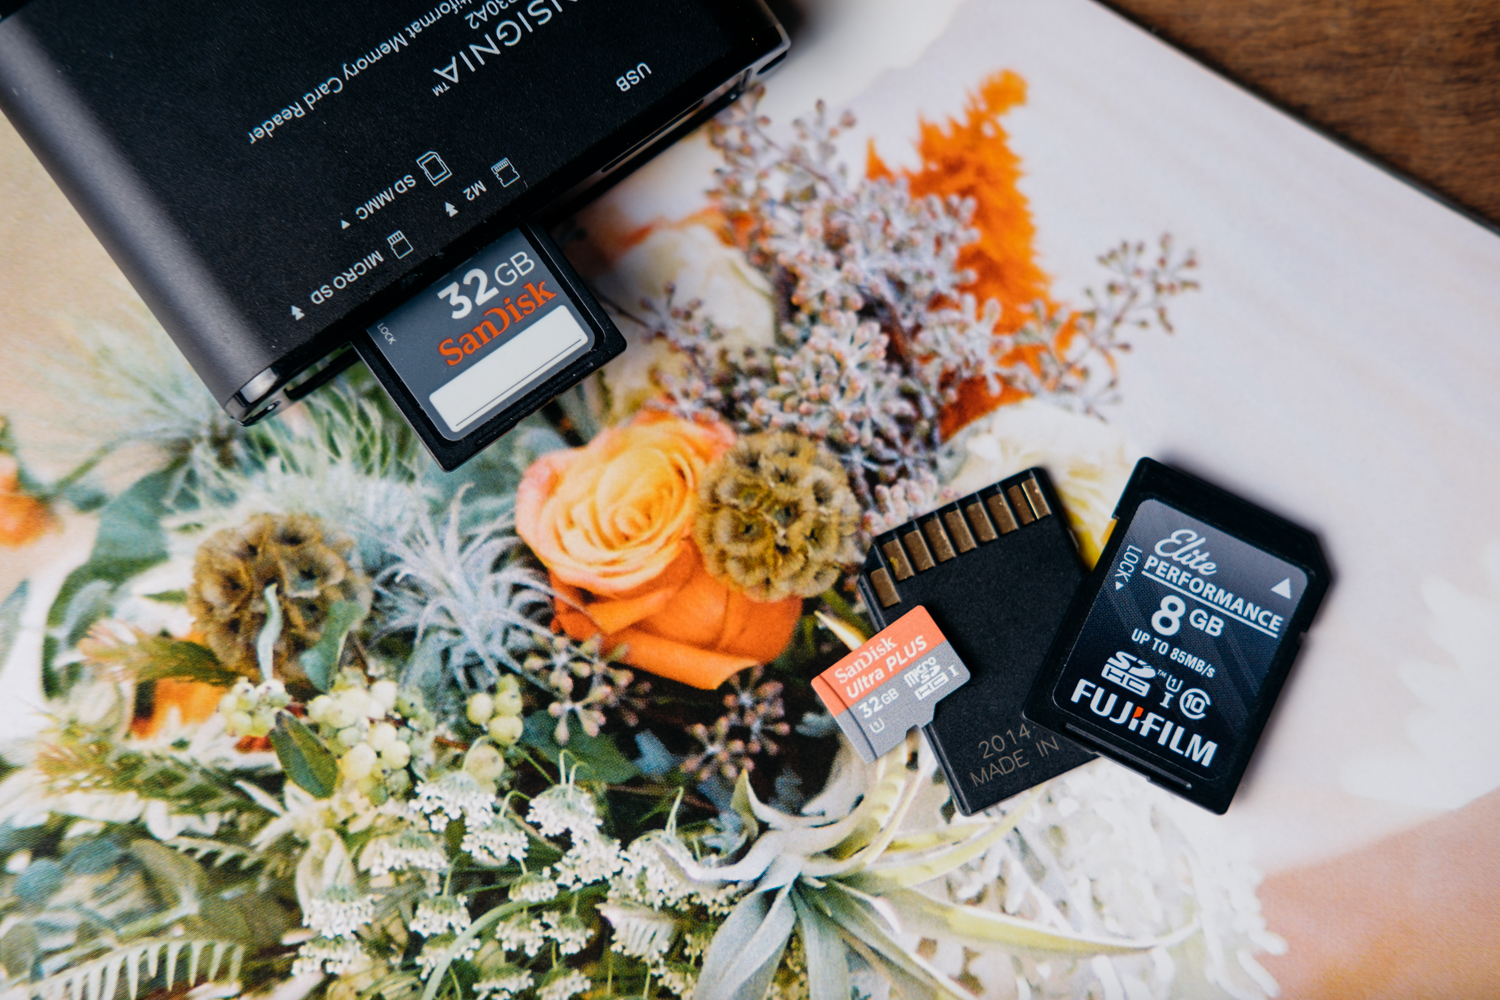 Cheap Photo: SanDisk Extreme PRO SD Card Savings and More!